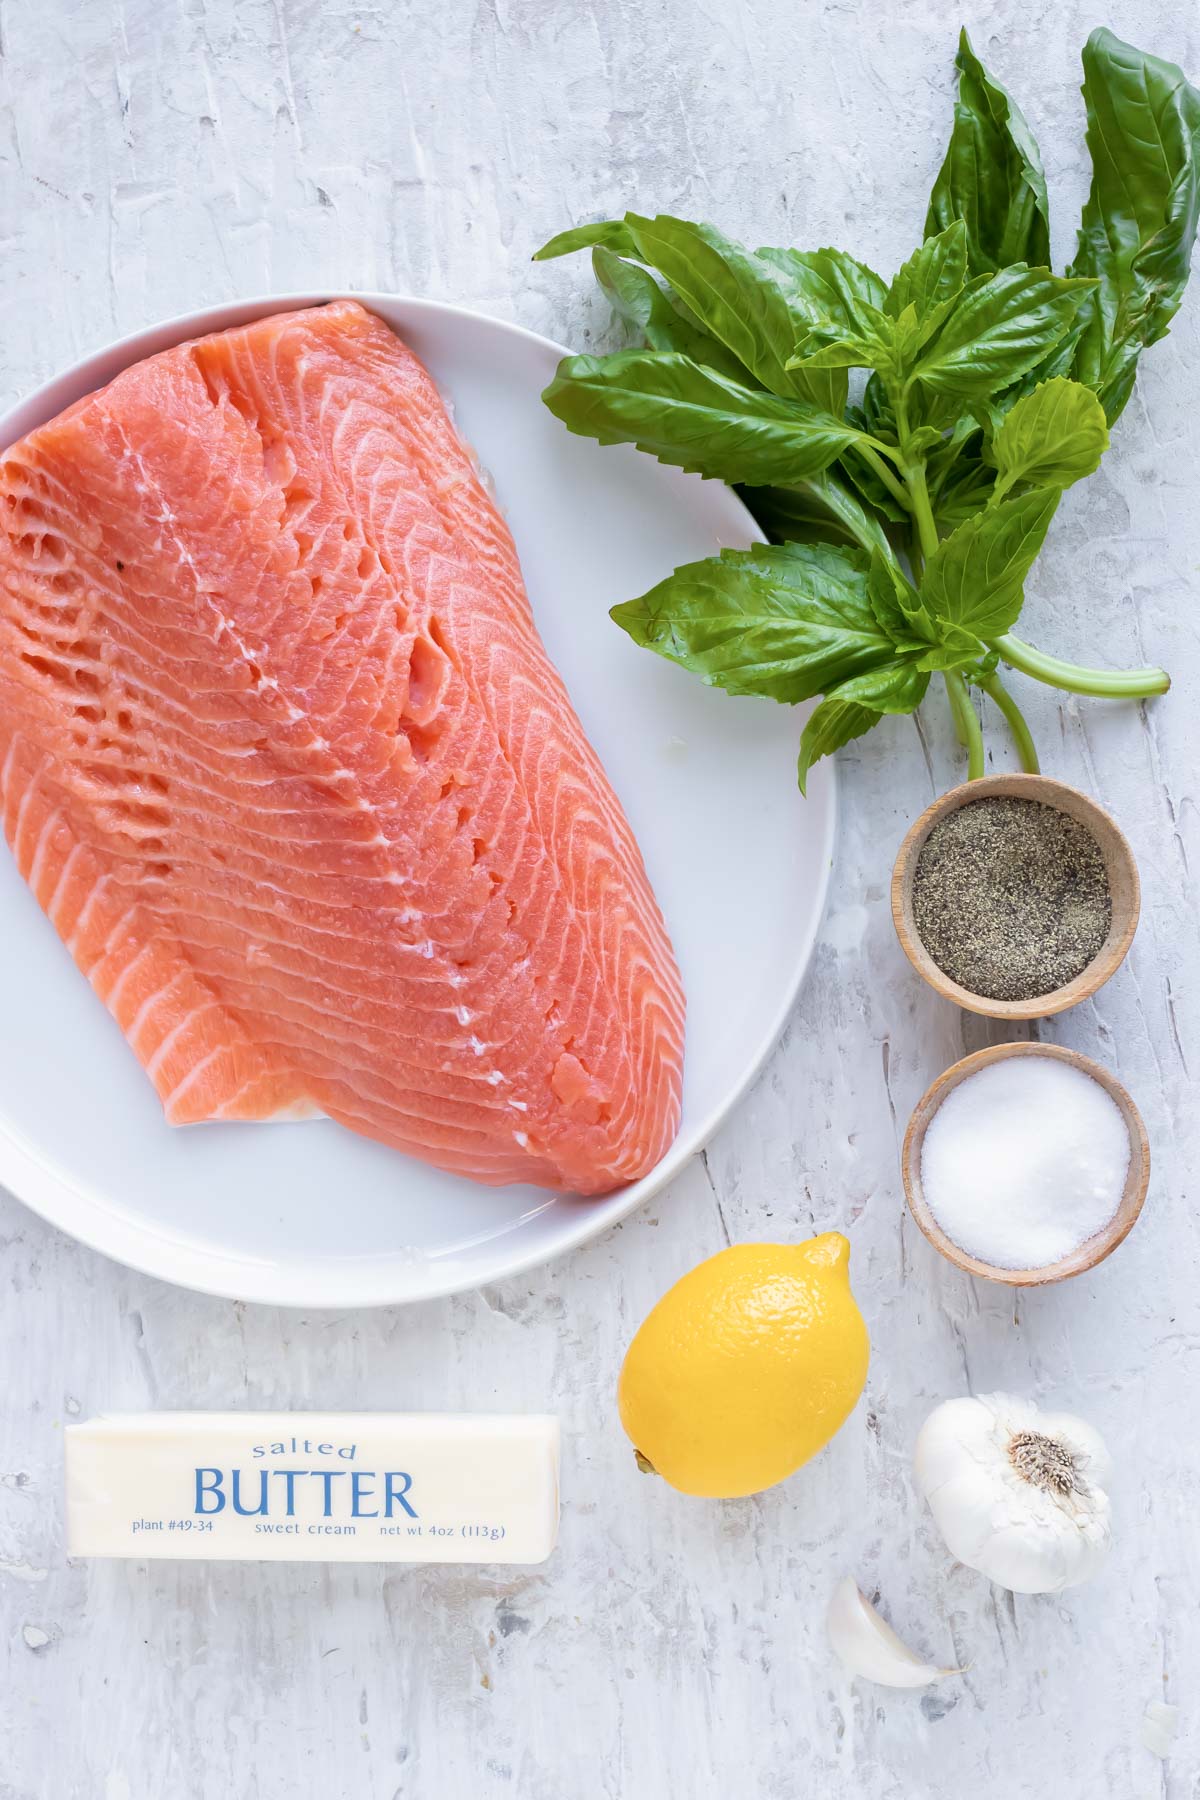 A pound of salmon, fresh basil, a lemon, garlic, salt, pepper, and butter - showing ingredients.